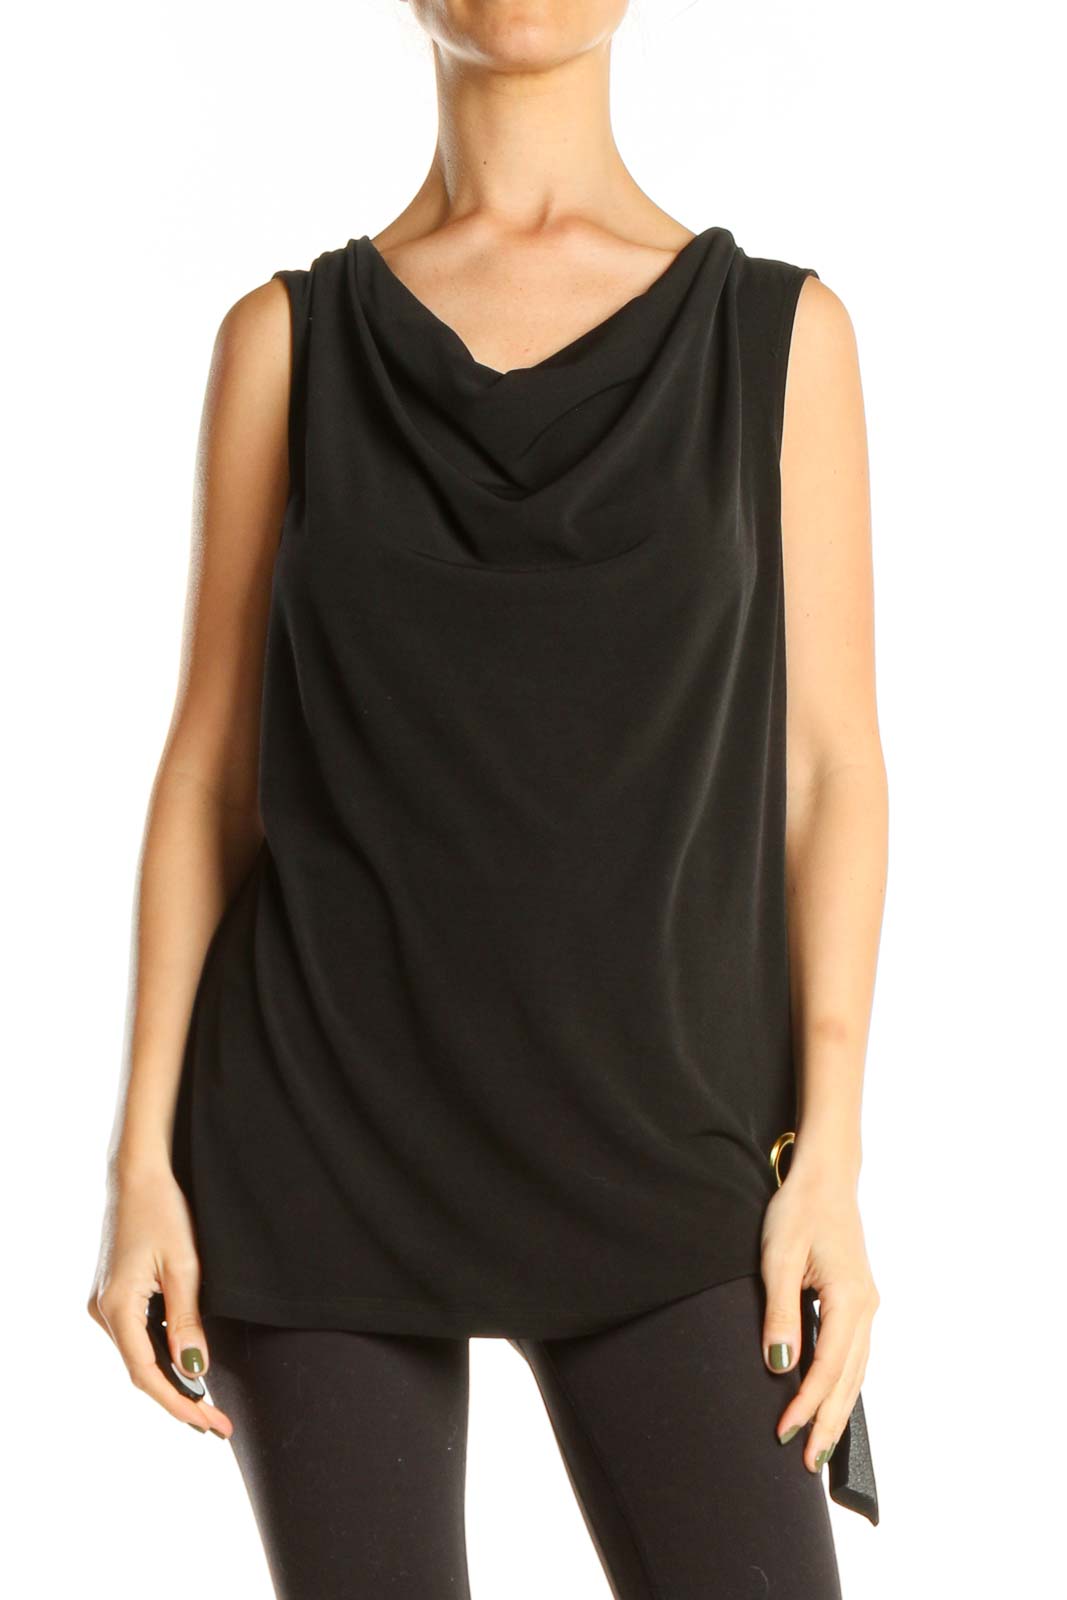 Black All Day Wear Top with Cowl Neck Detail Front